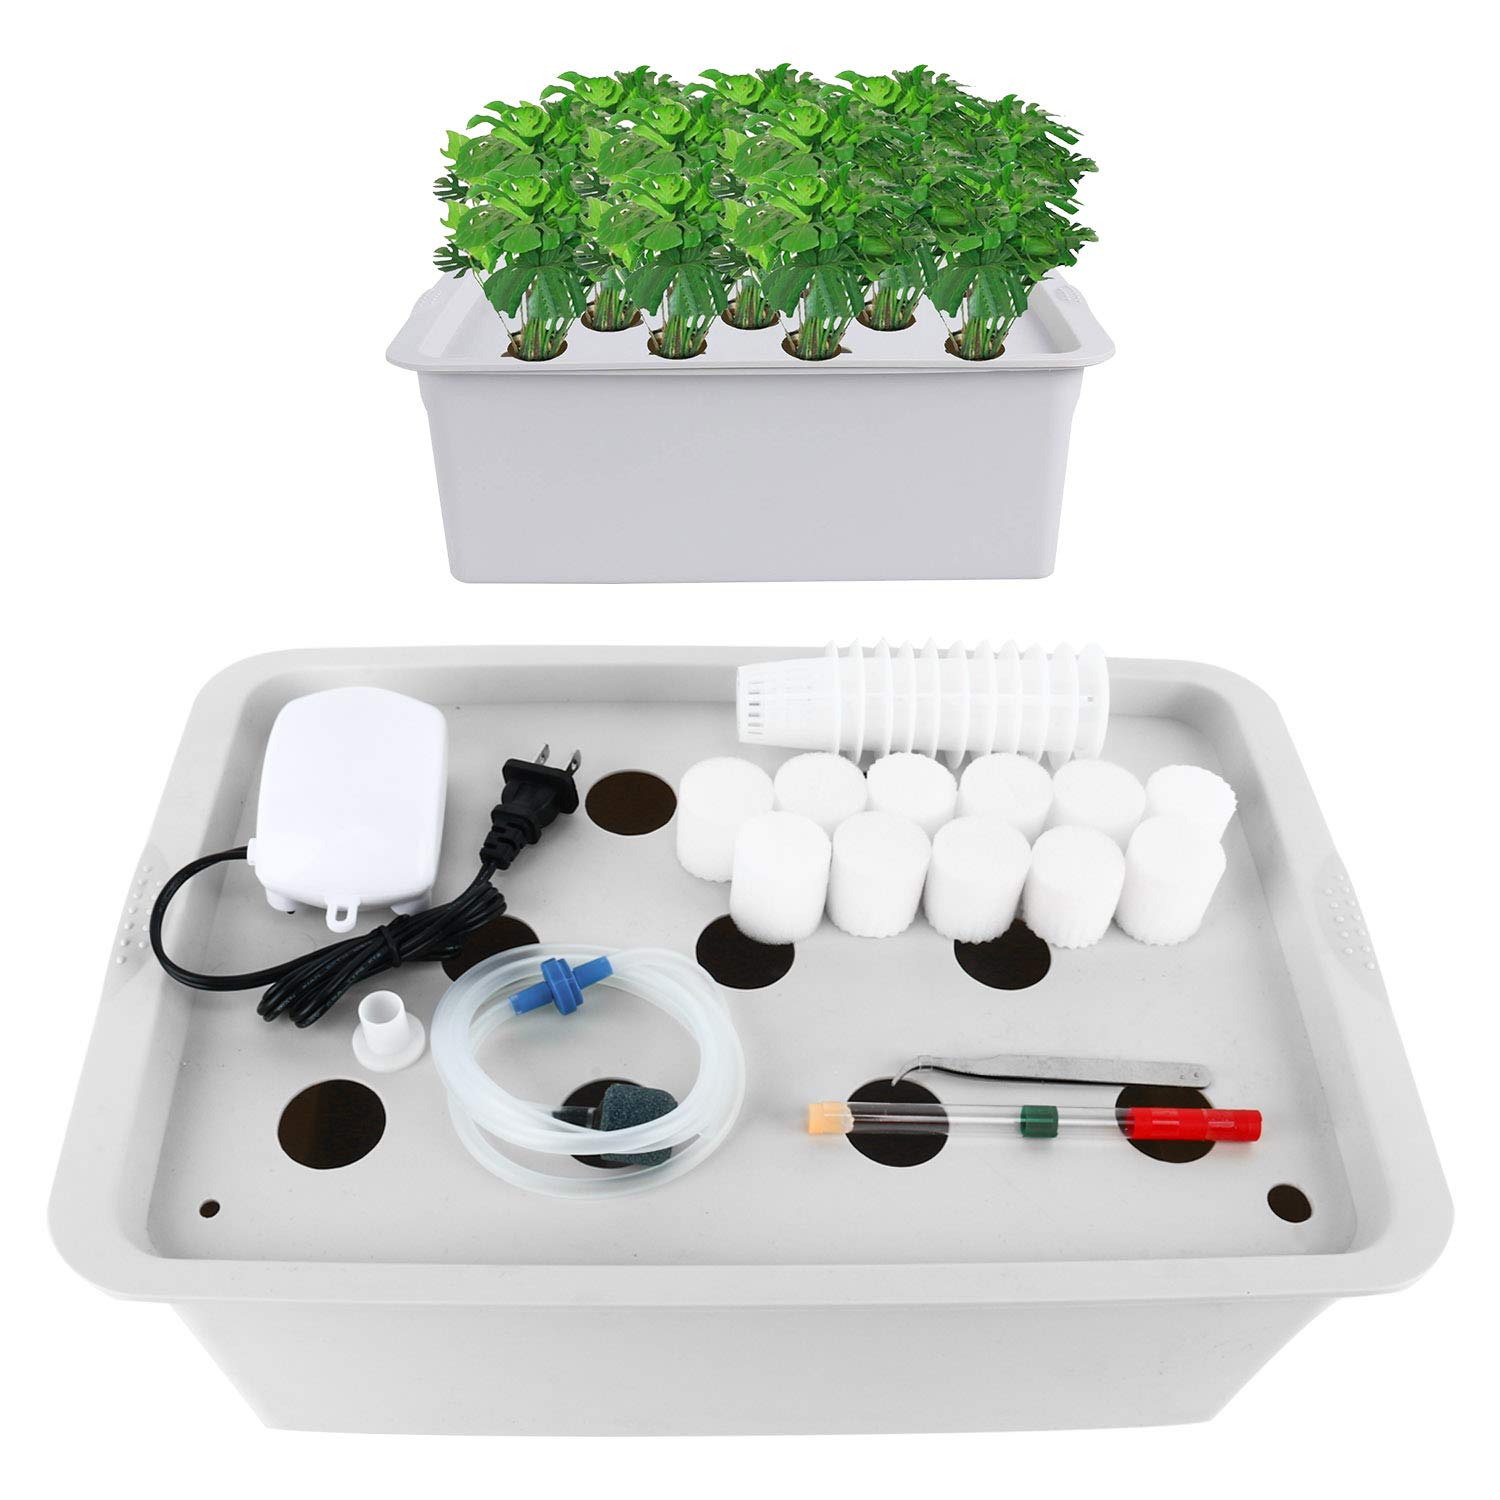 Best hydroponic boxes for beginners缩略图